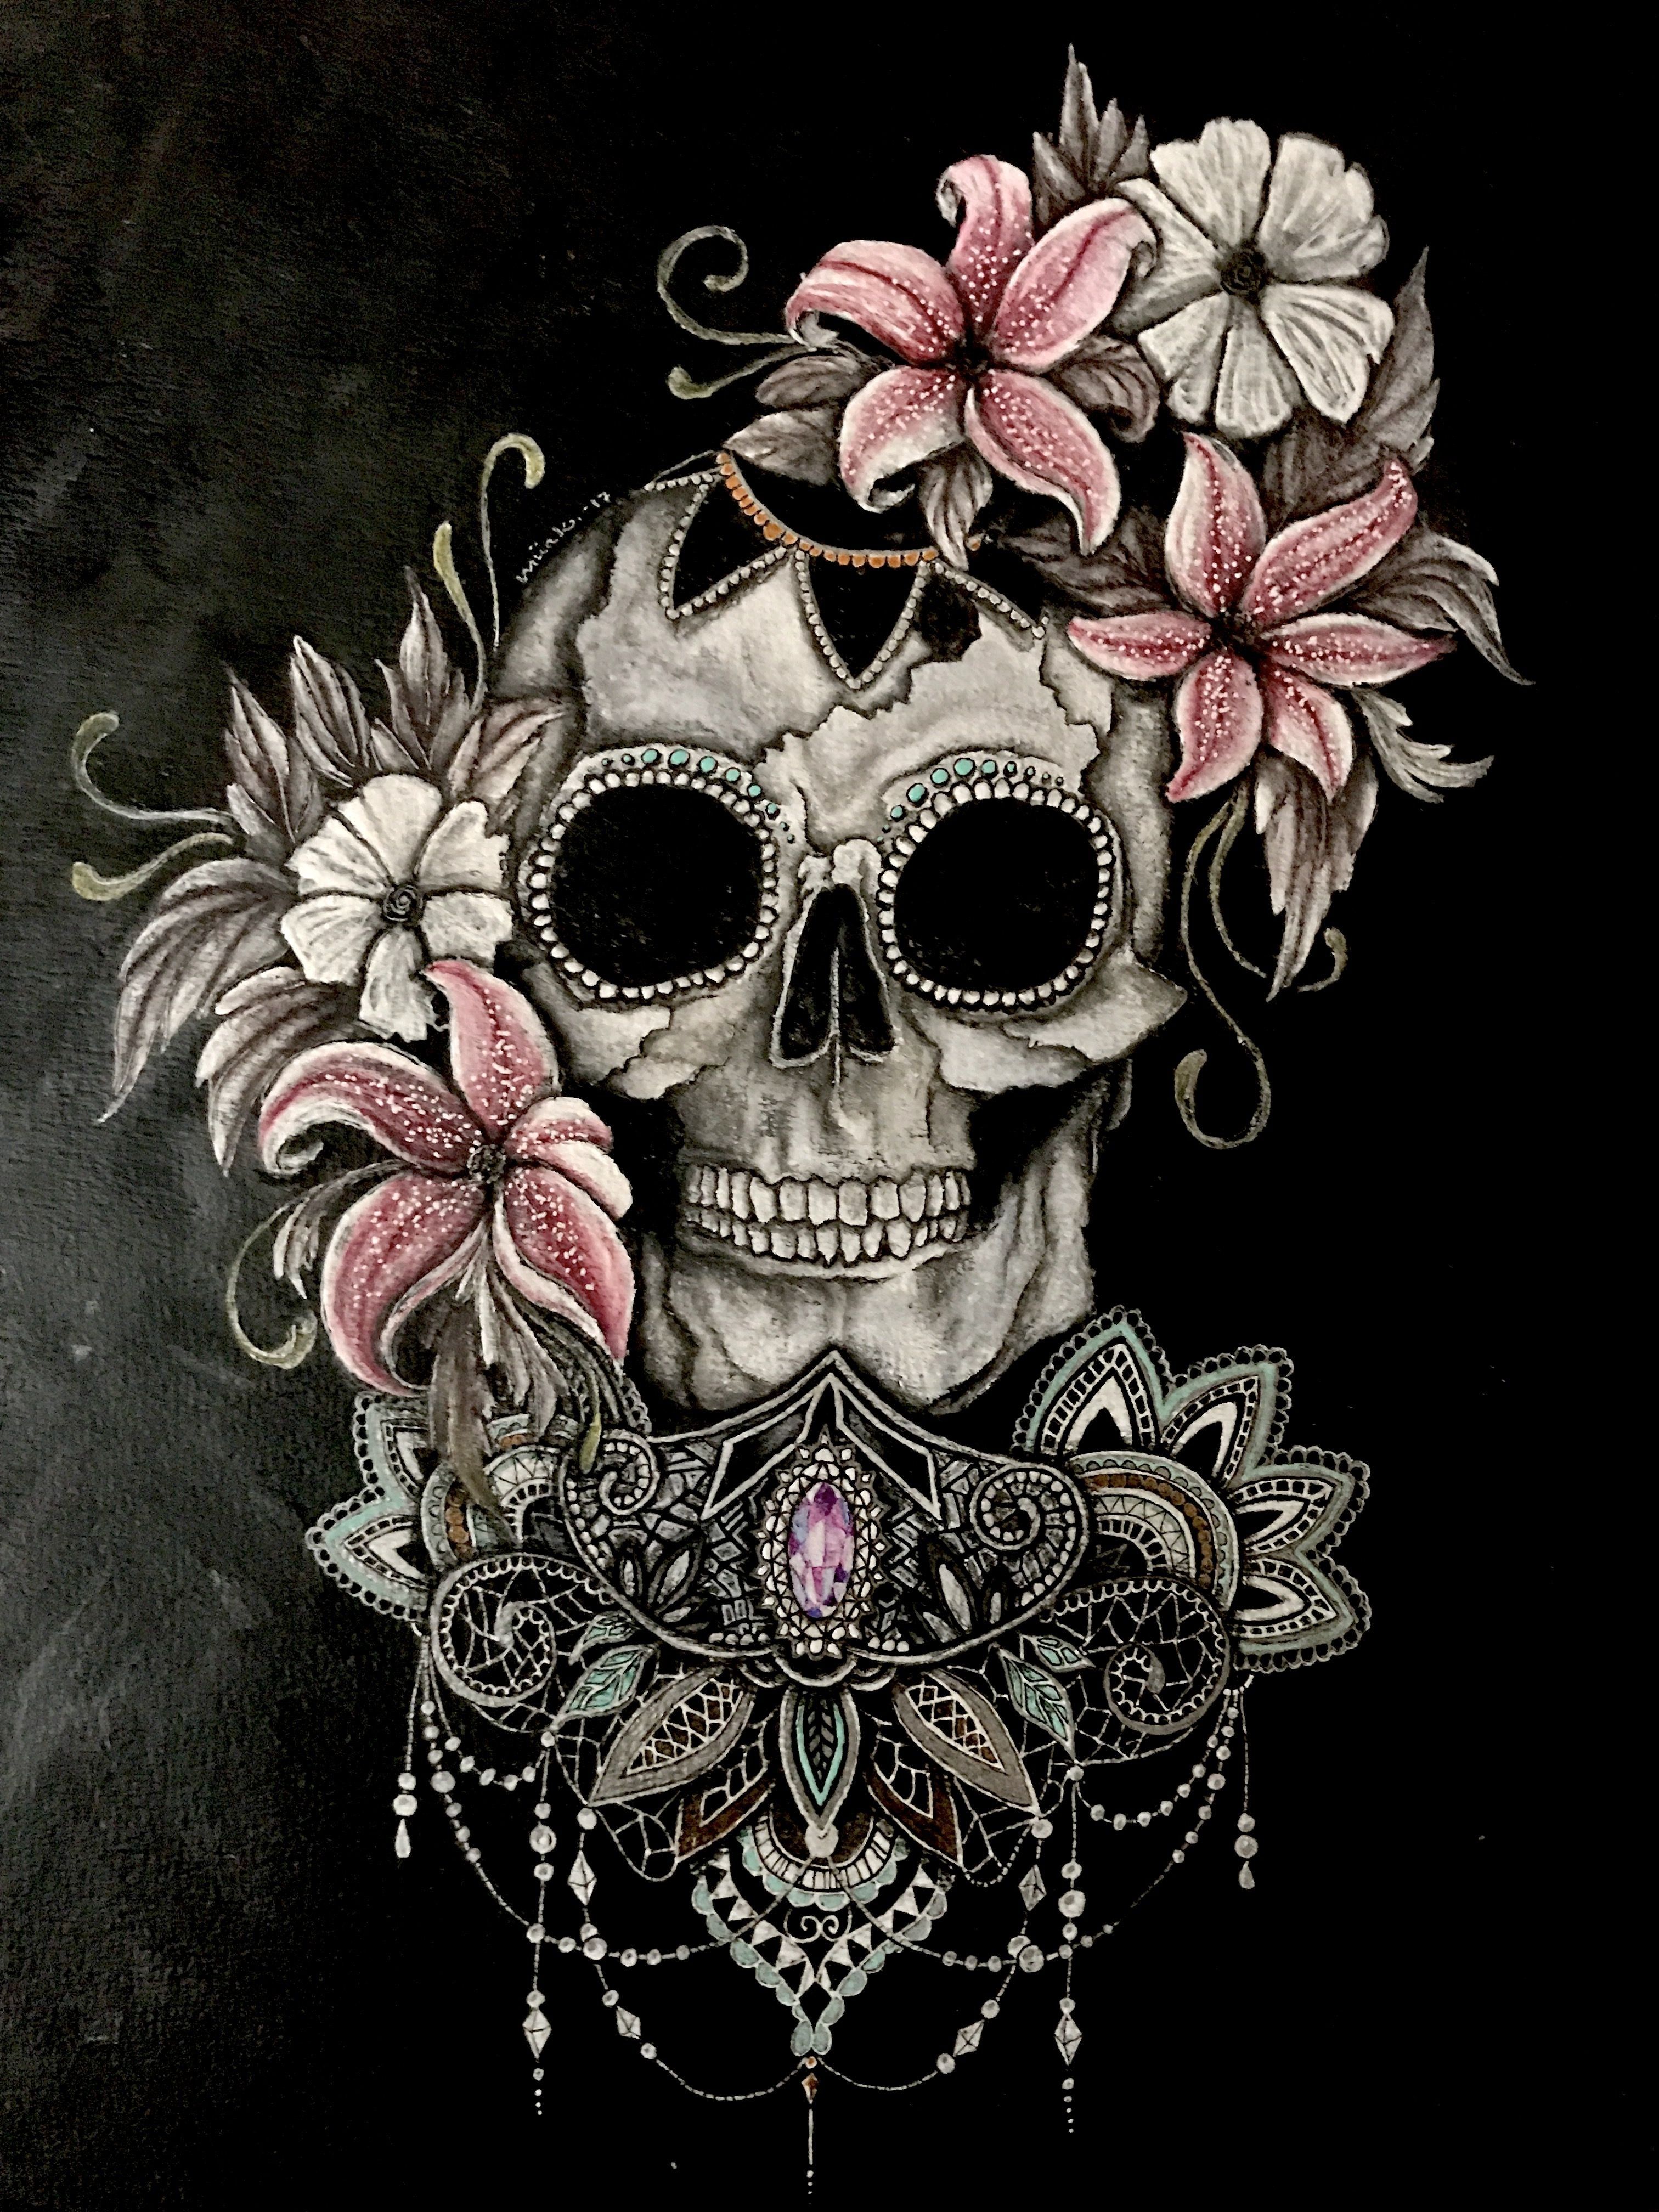 Girly skull galaxy iPhoneAndroid wallpaper I created for the app CocoPPa   Skull wallpaper Emo wallpaper Android wallpaper